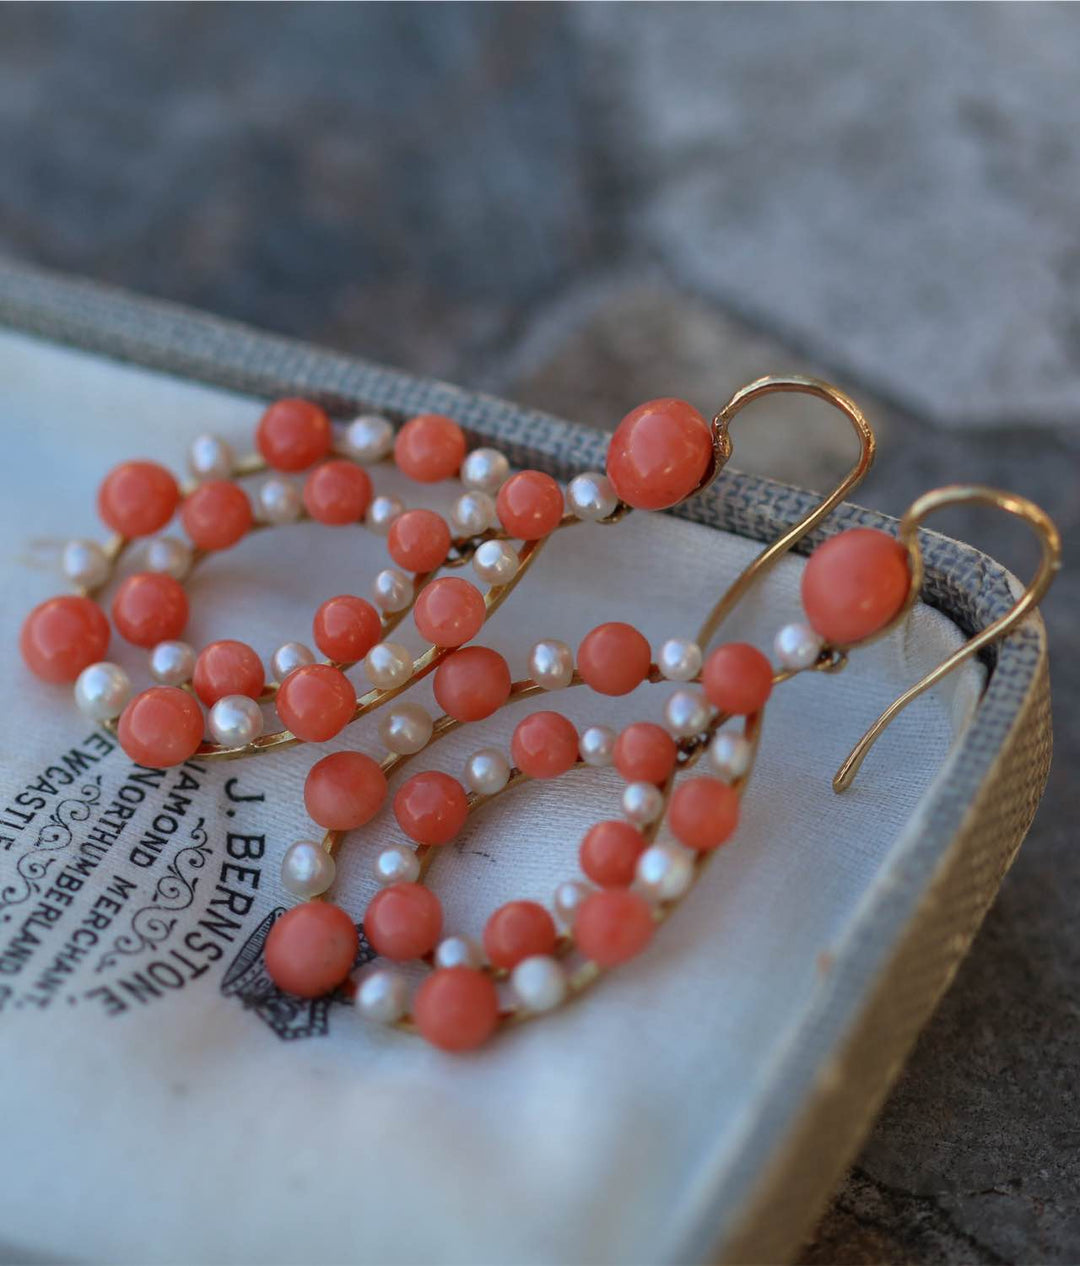 Antique Coral and Pearl Gold Teardrop Earrings